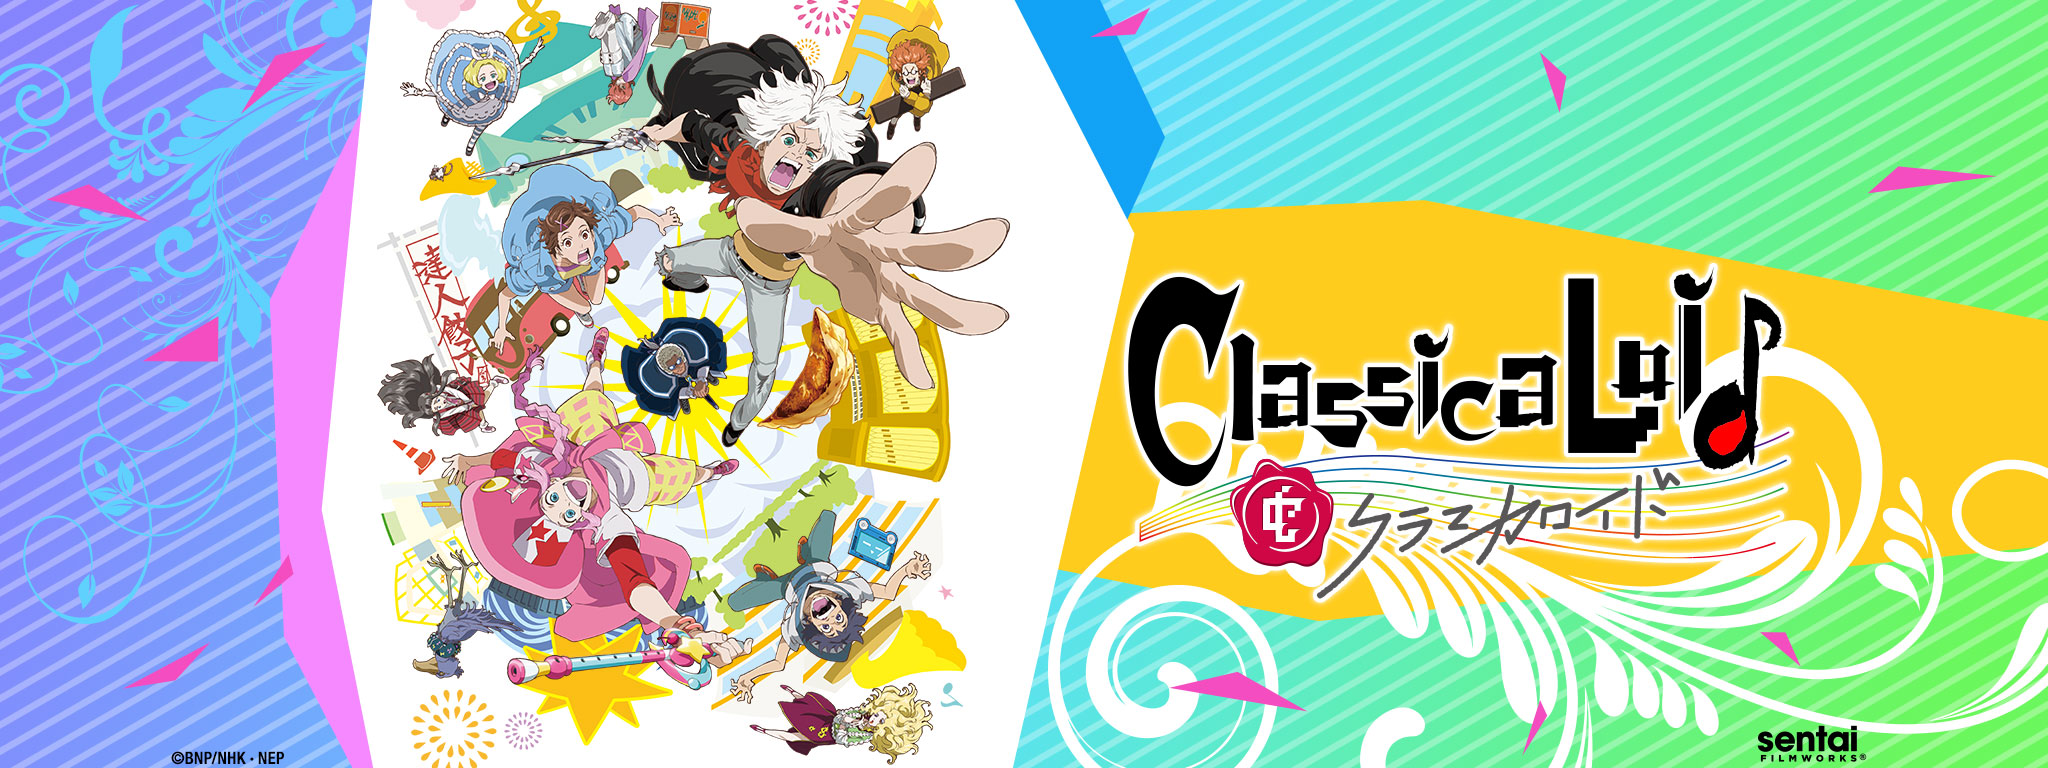 Title Art for ClassicaLoid